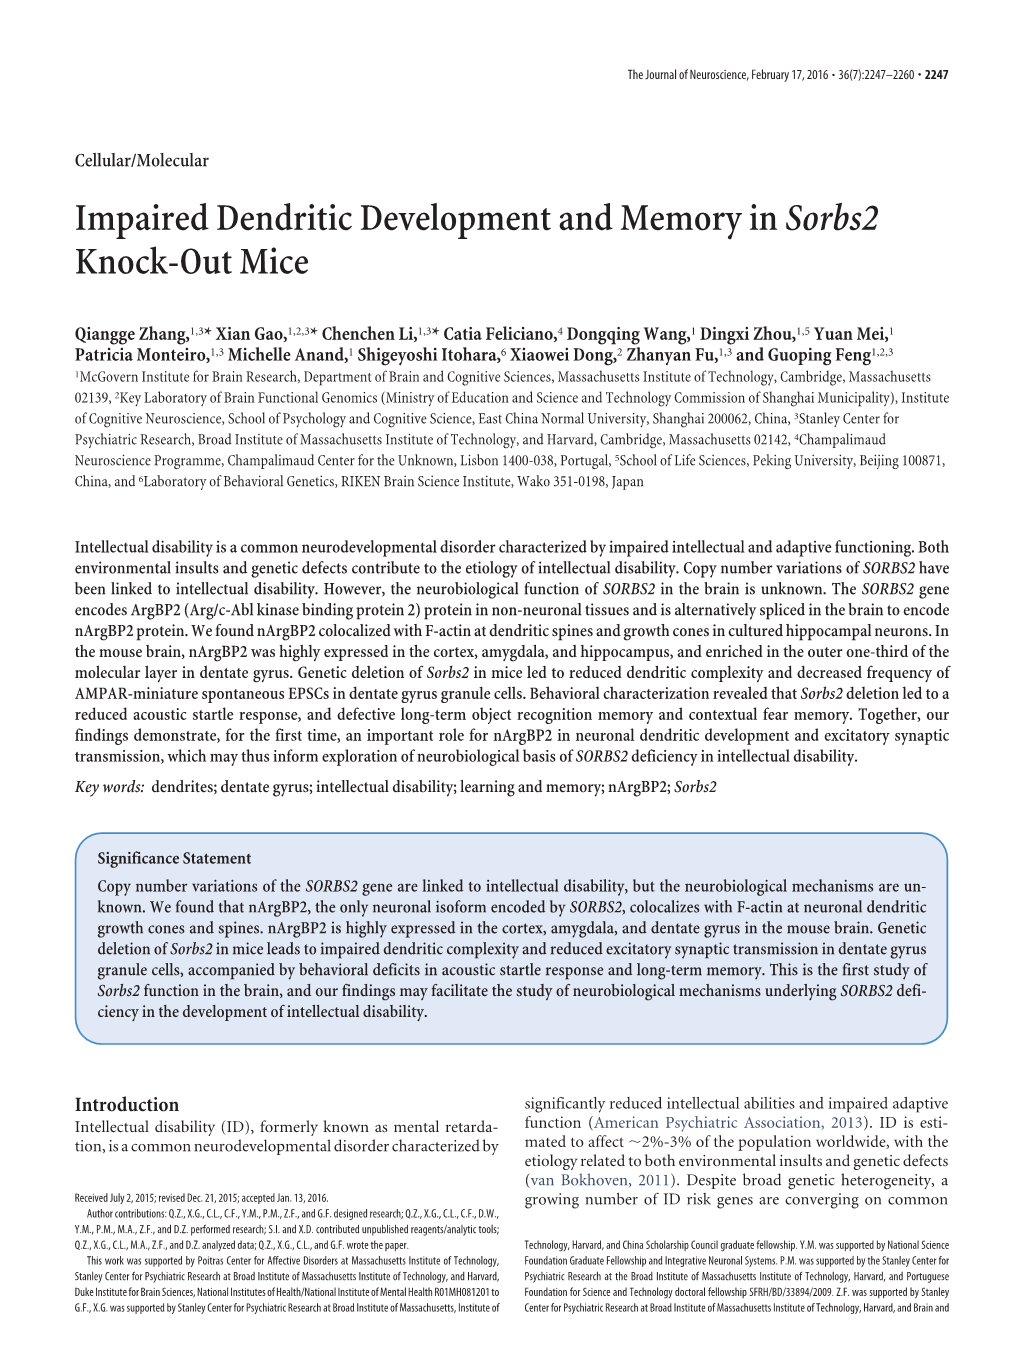 Impaired Dendritic Development and Memory in Sorbs2 Knock-Out Mice